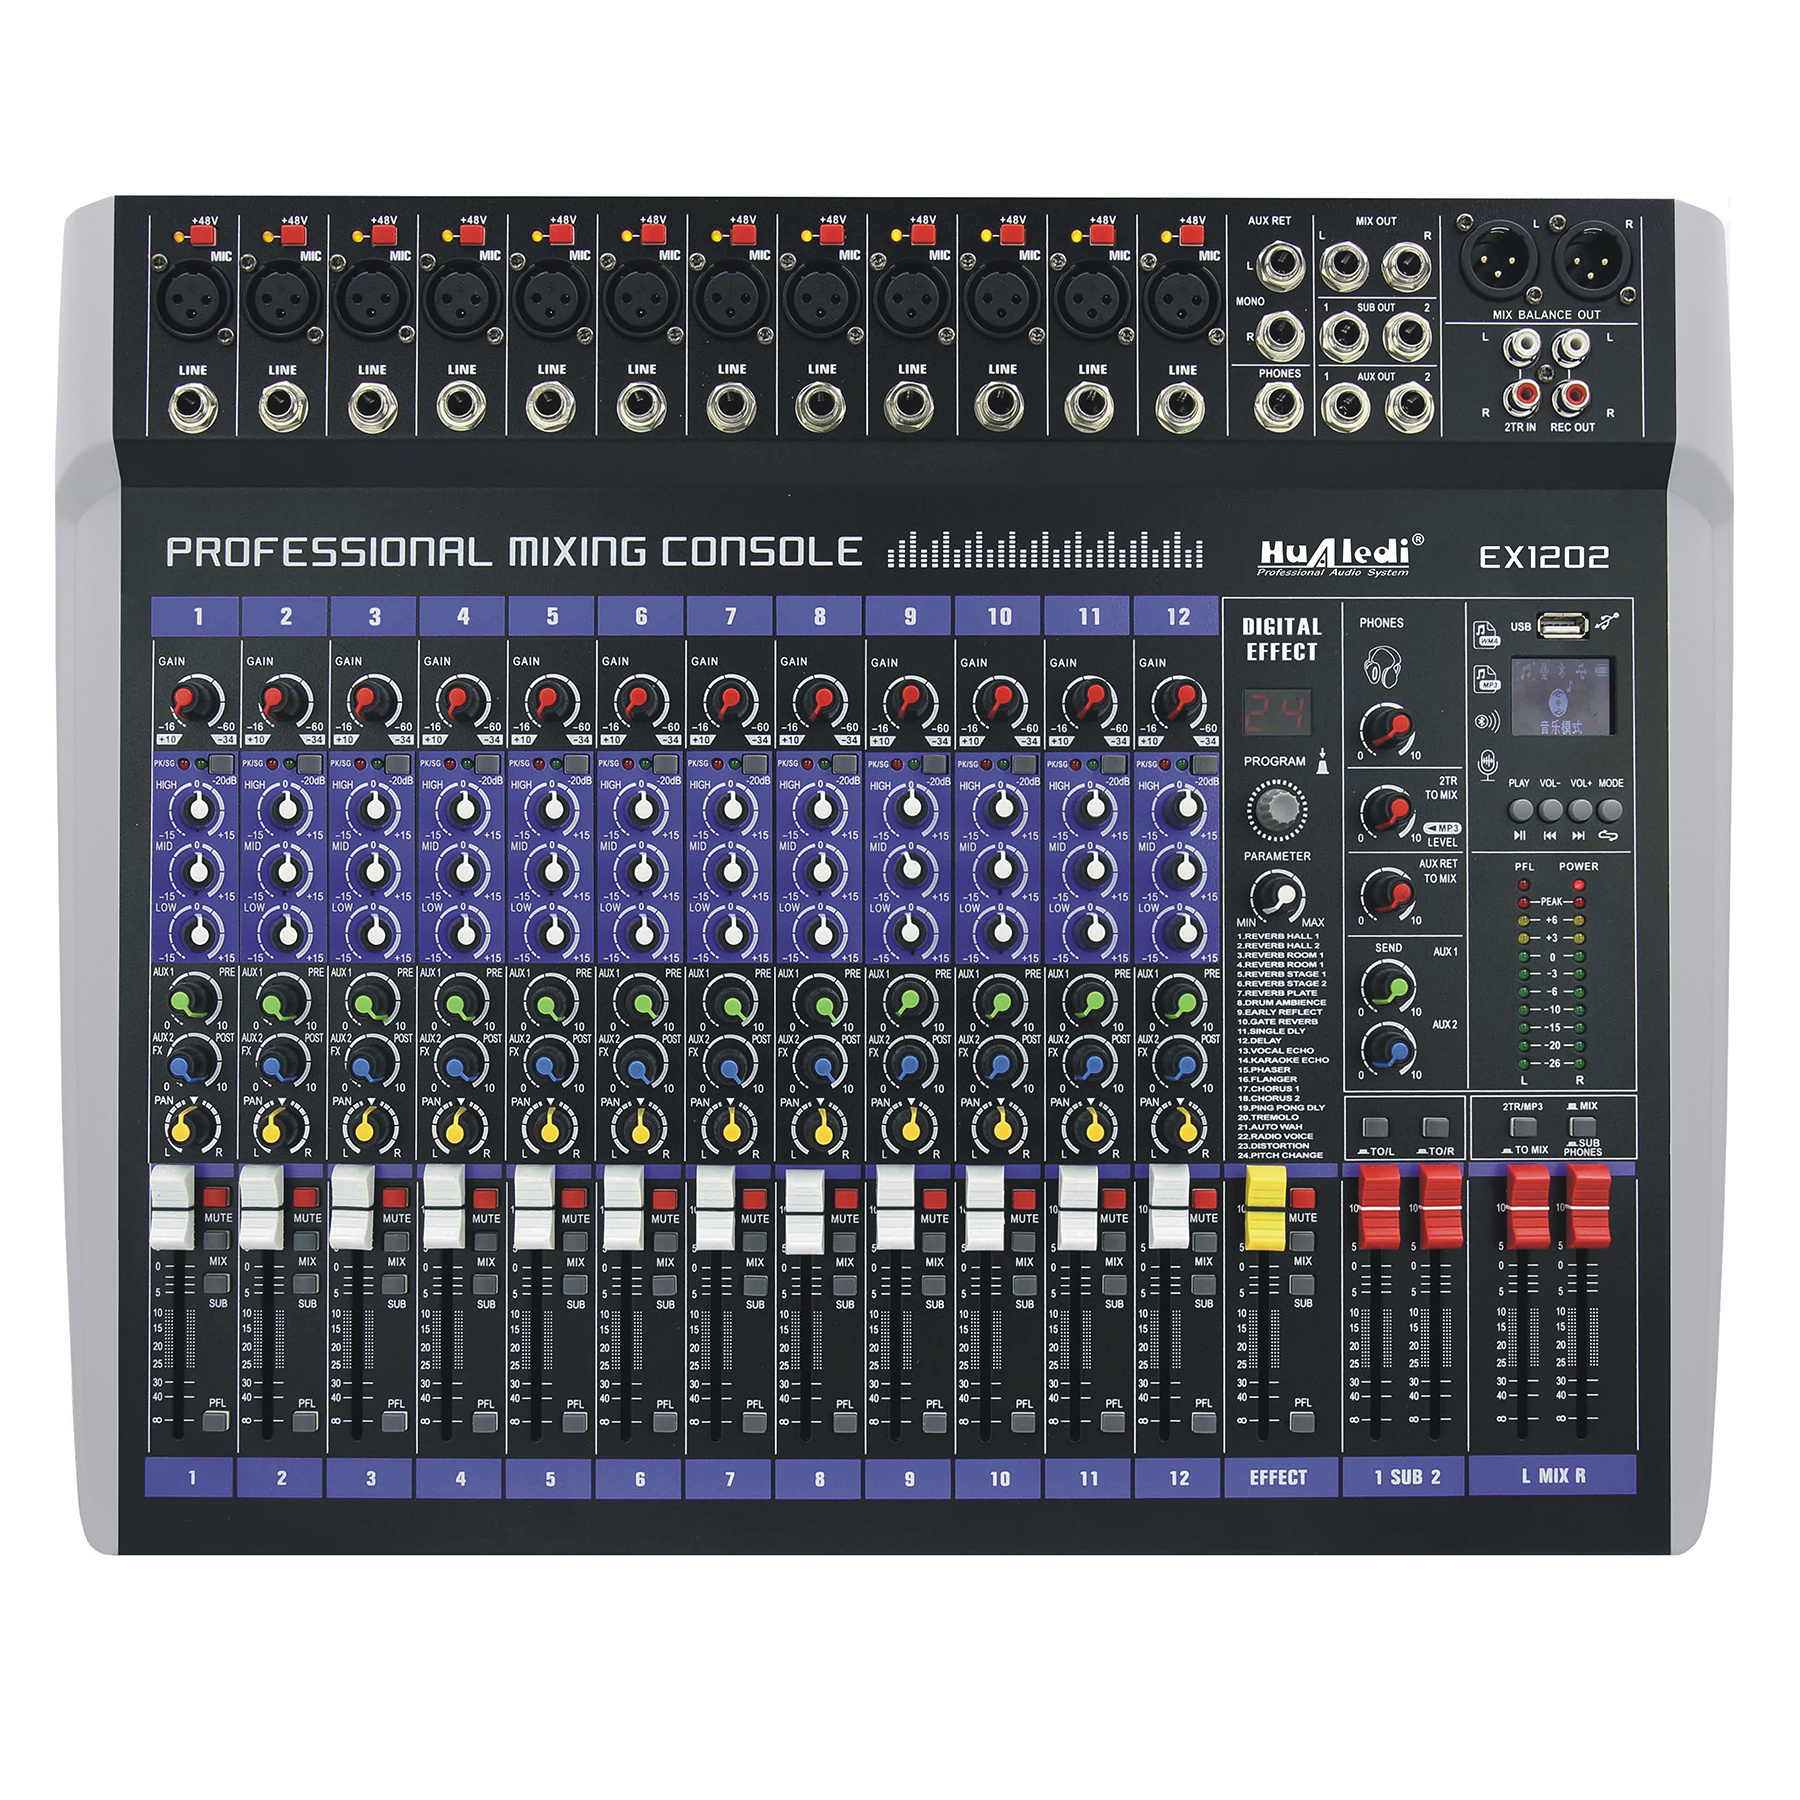 12 channels mixing console Mobile Bluetooth connection